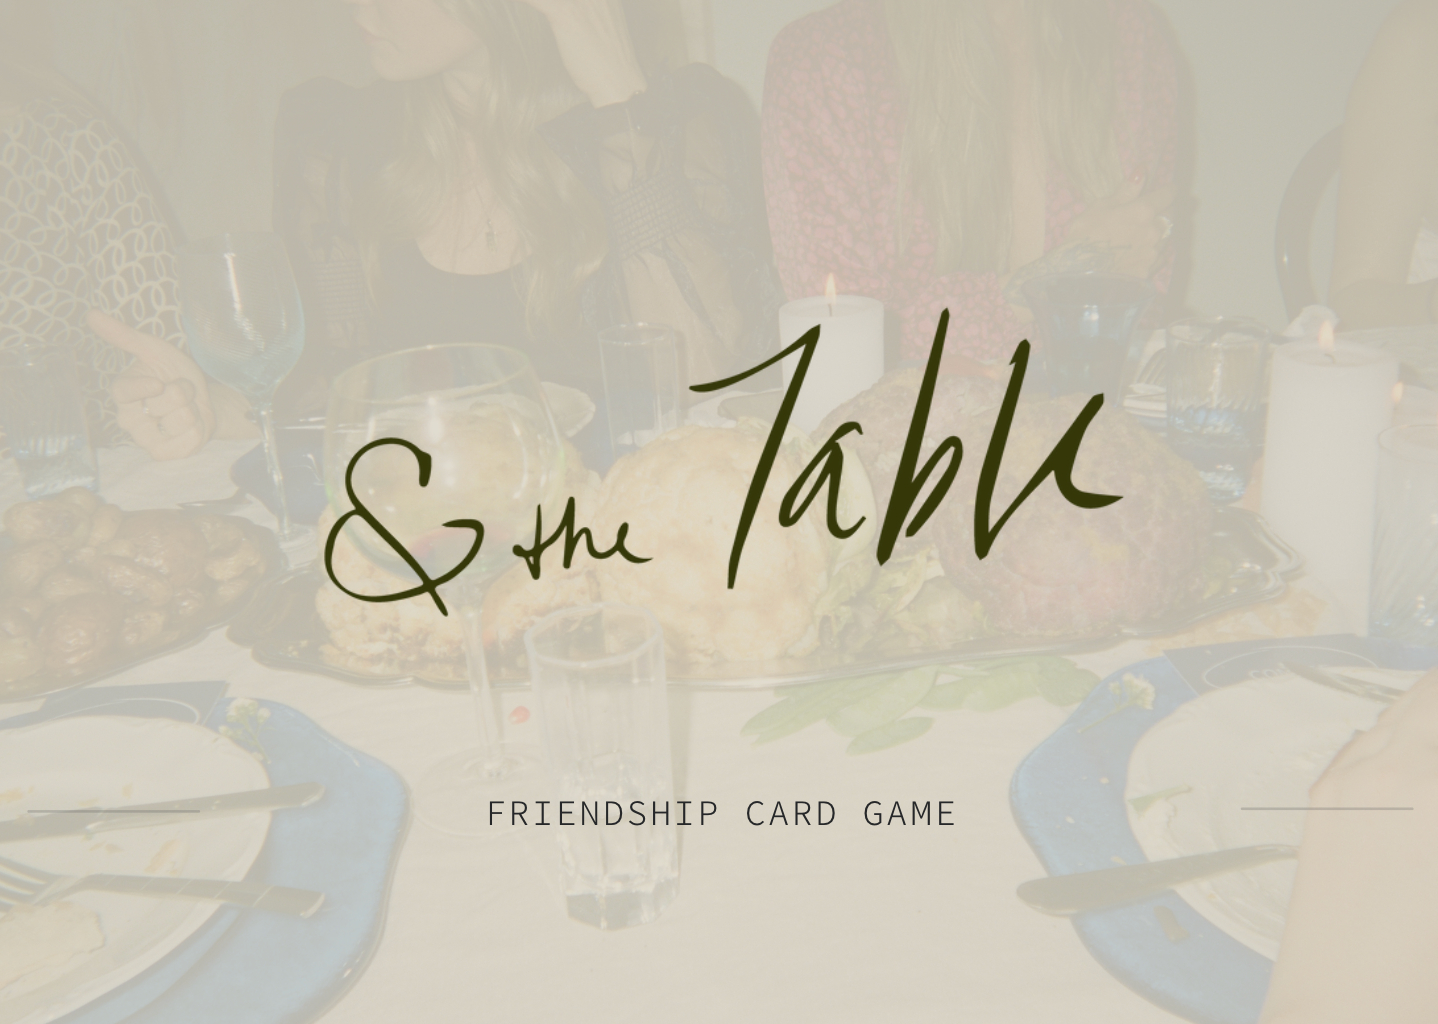 THE FRIENDSHIP CARD PACK